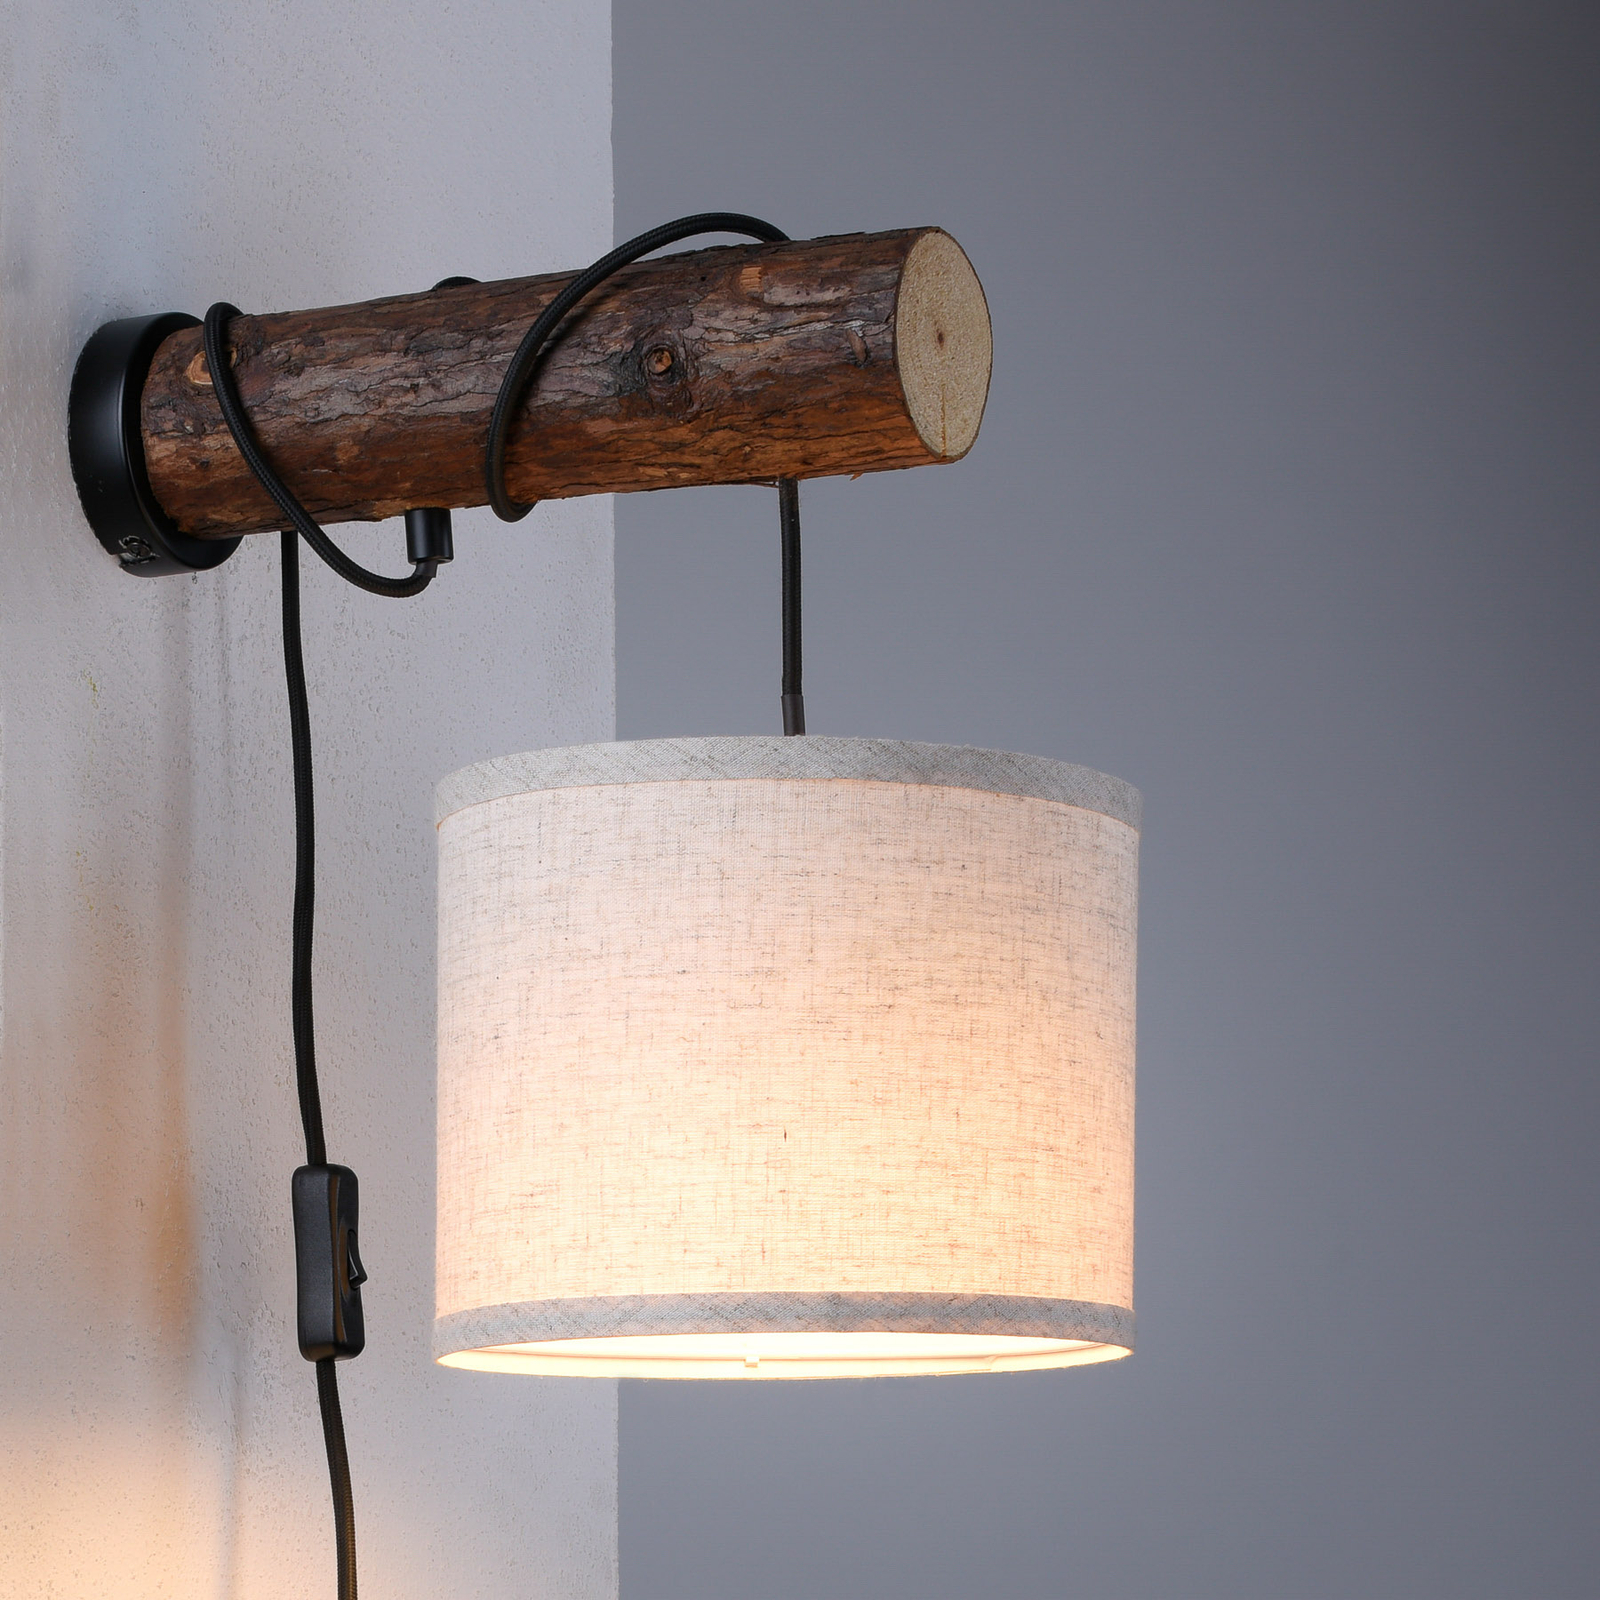 Bark wall light, including power cable with a plug